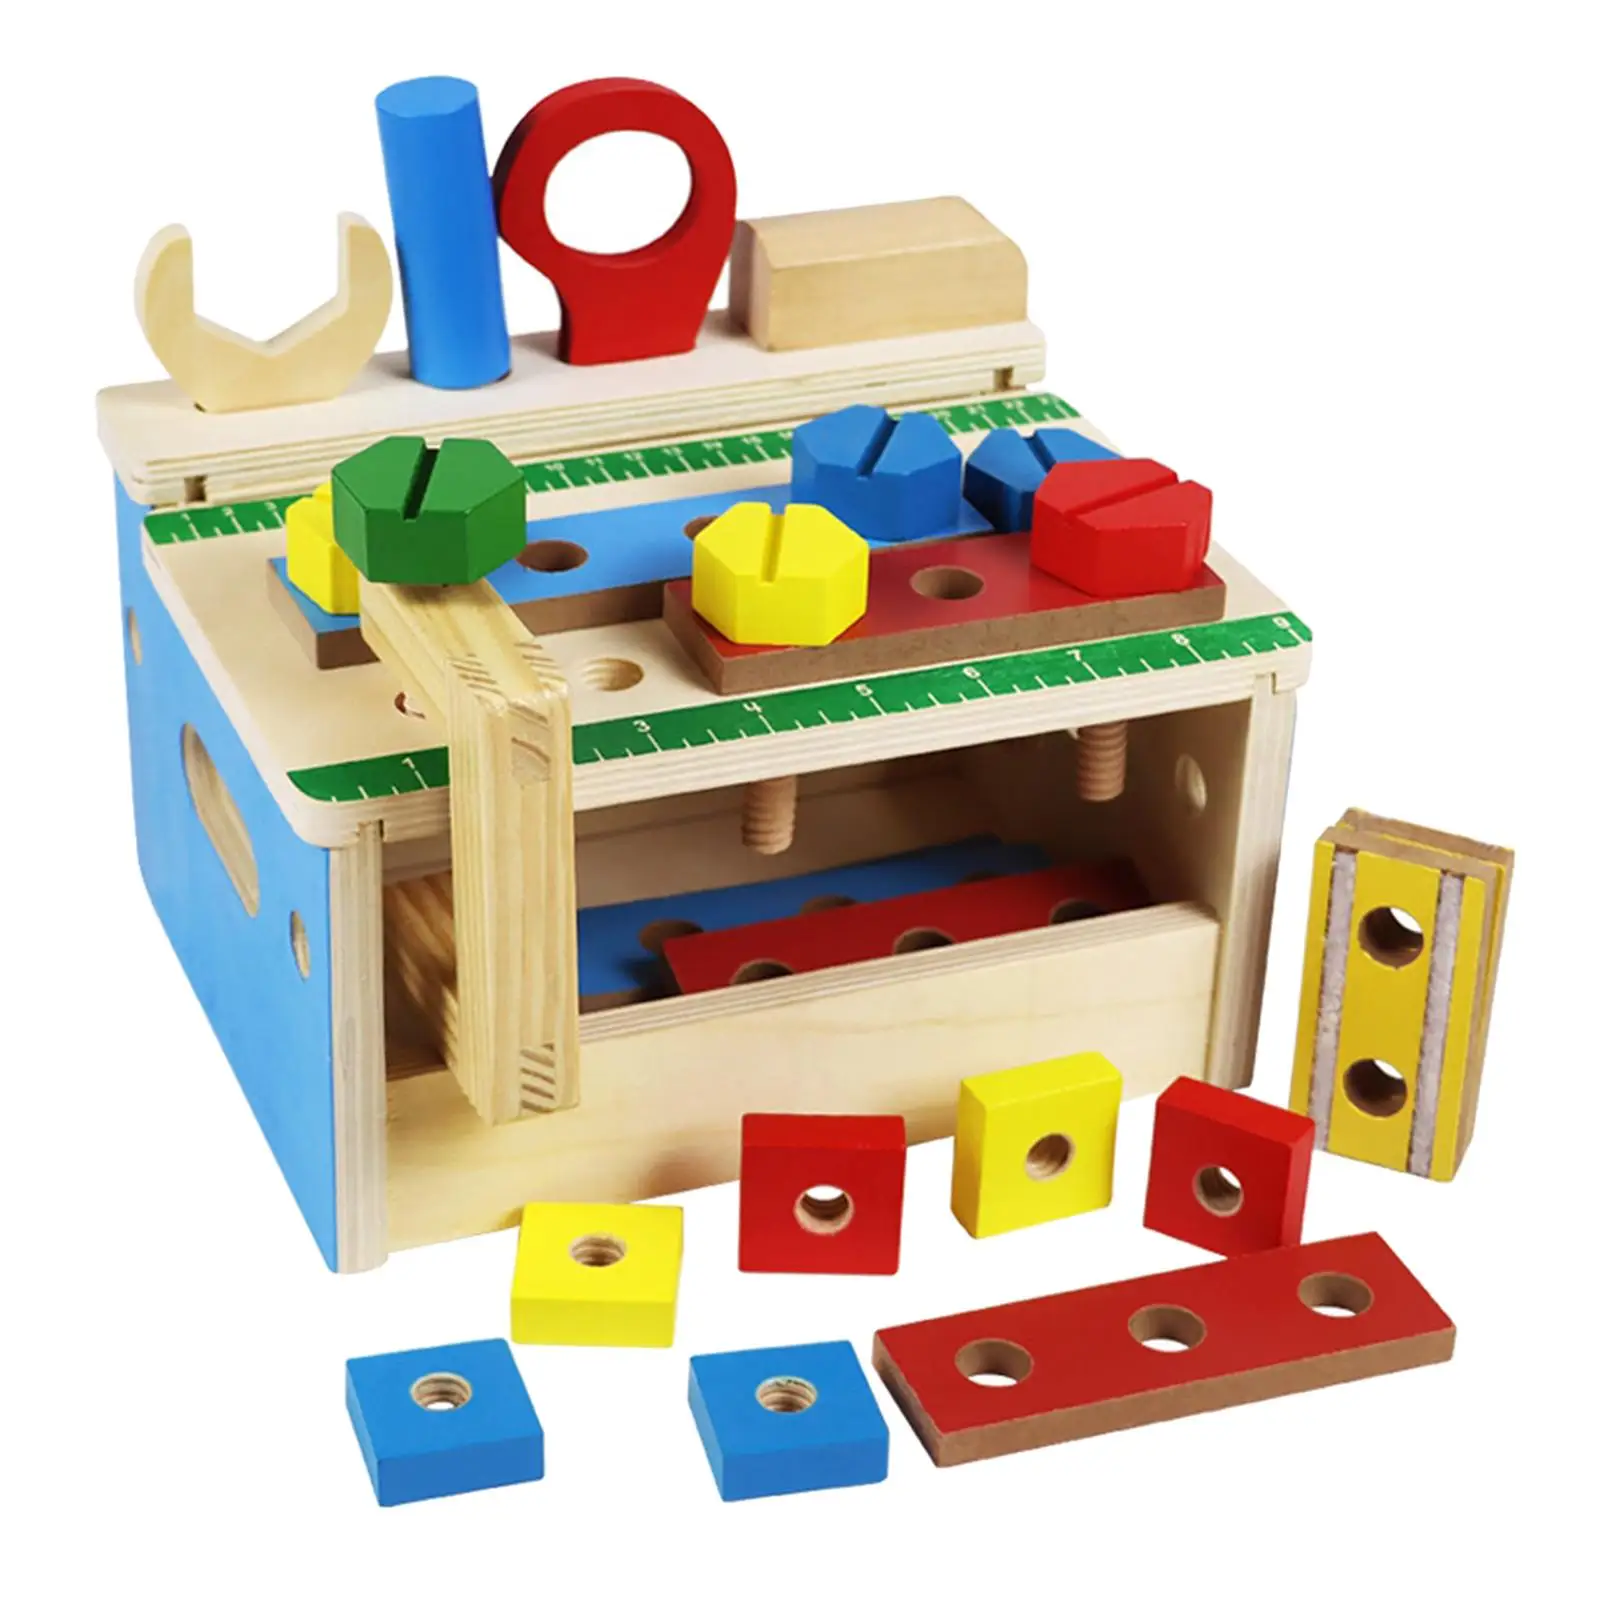 Tool Kit Toy Learning Educational Toy Wooden Construction Toy Tool for Toddler